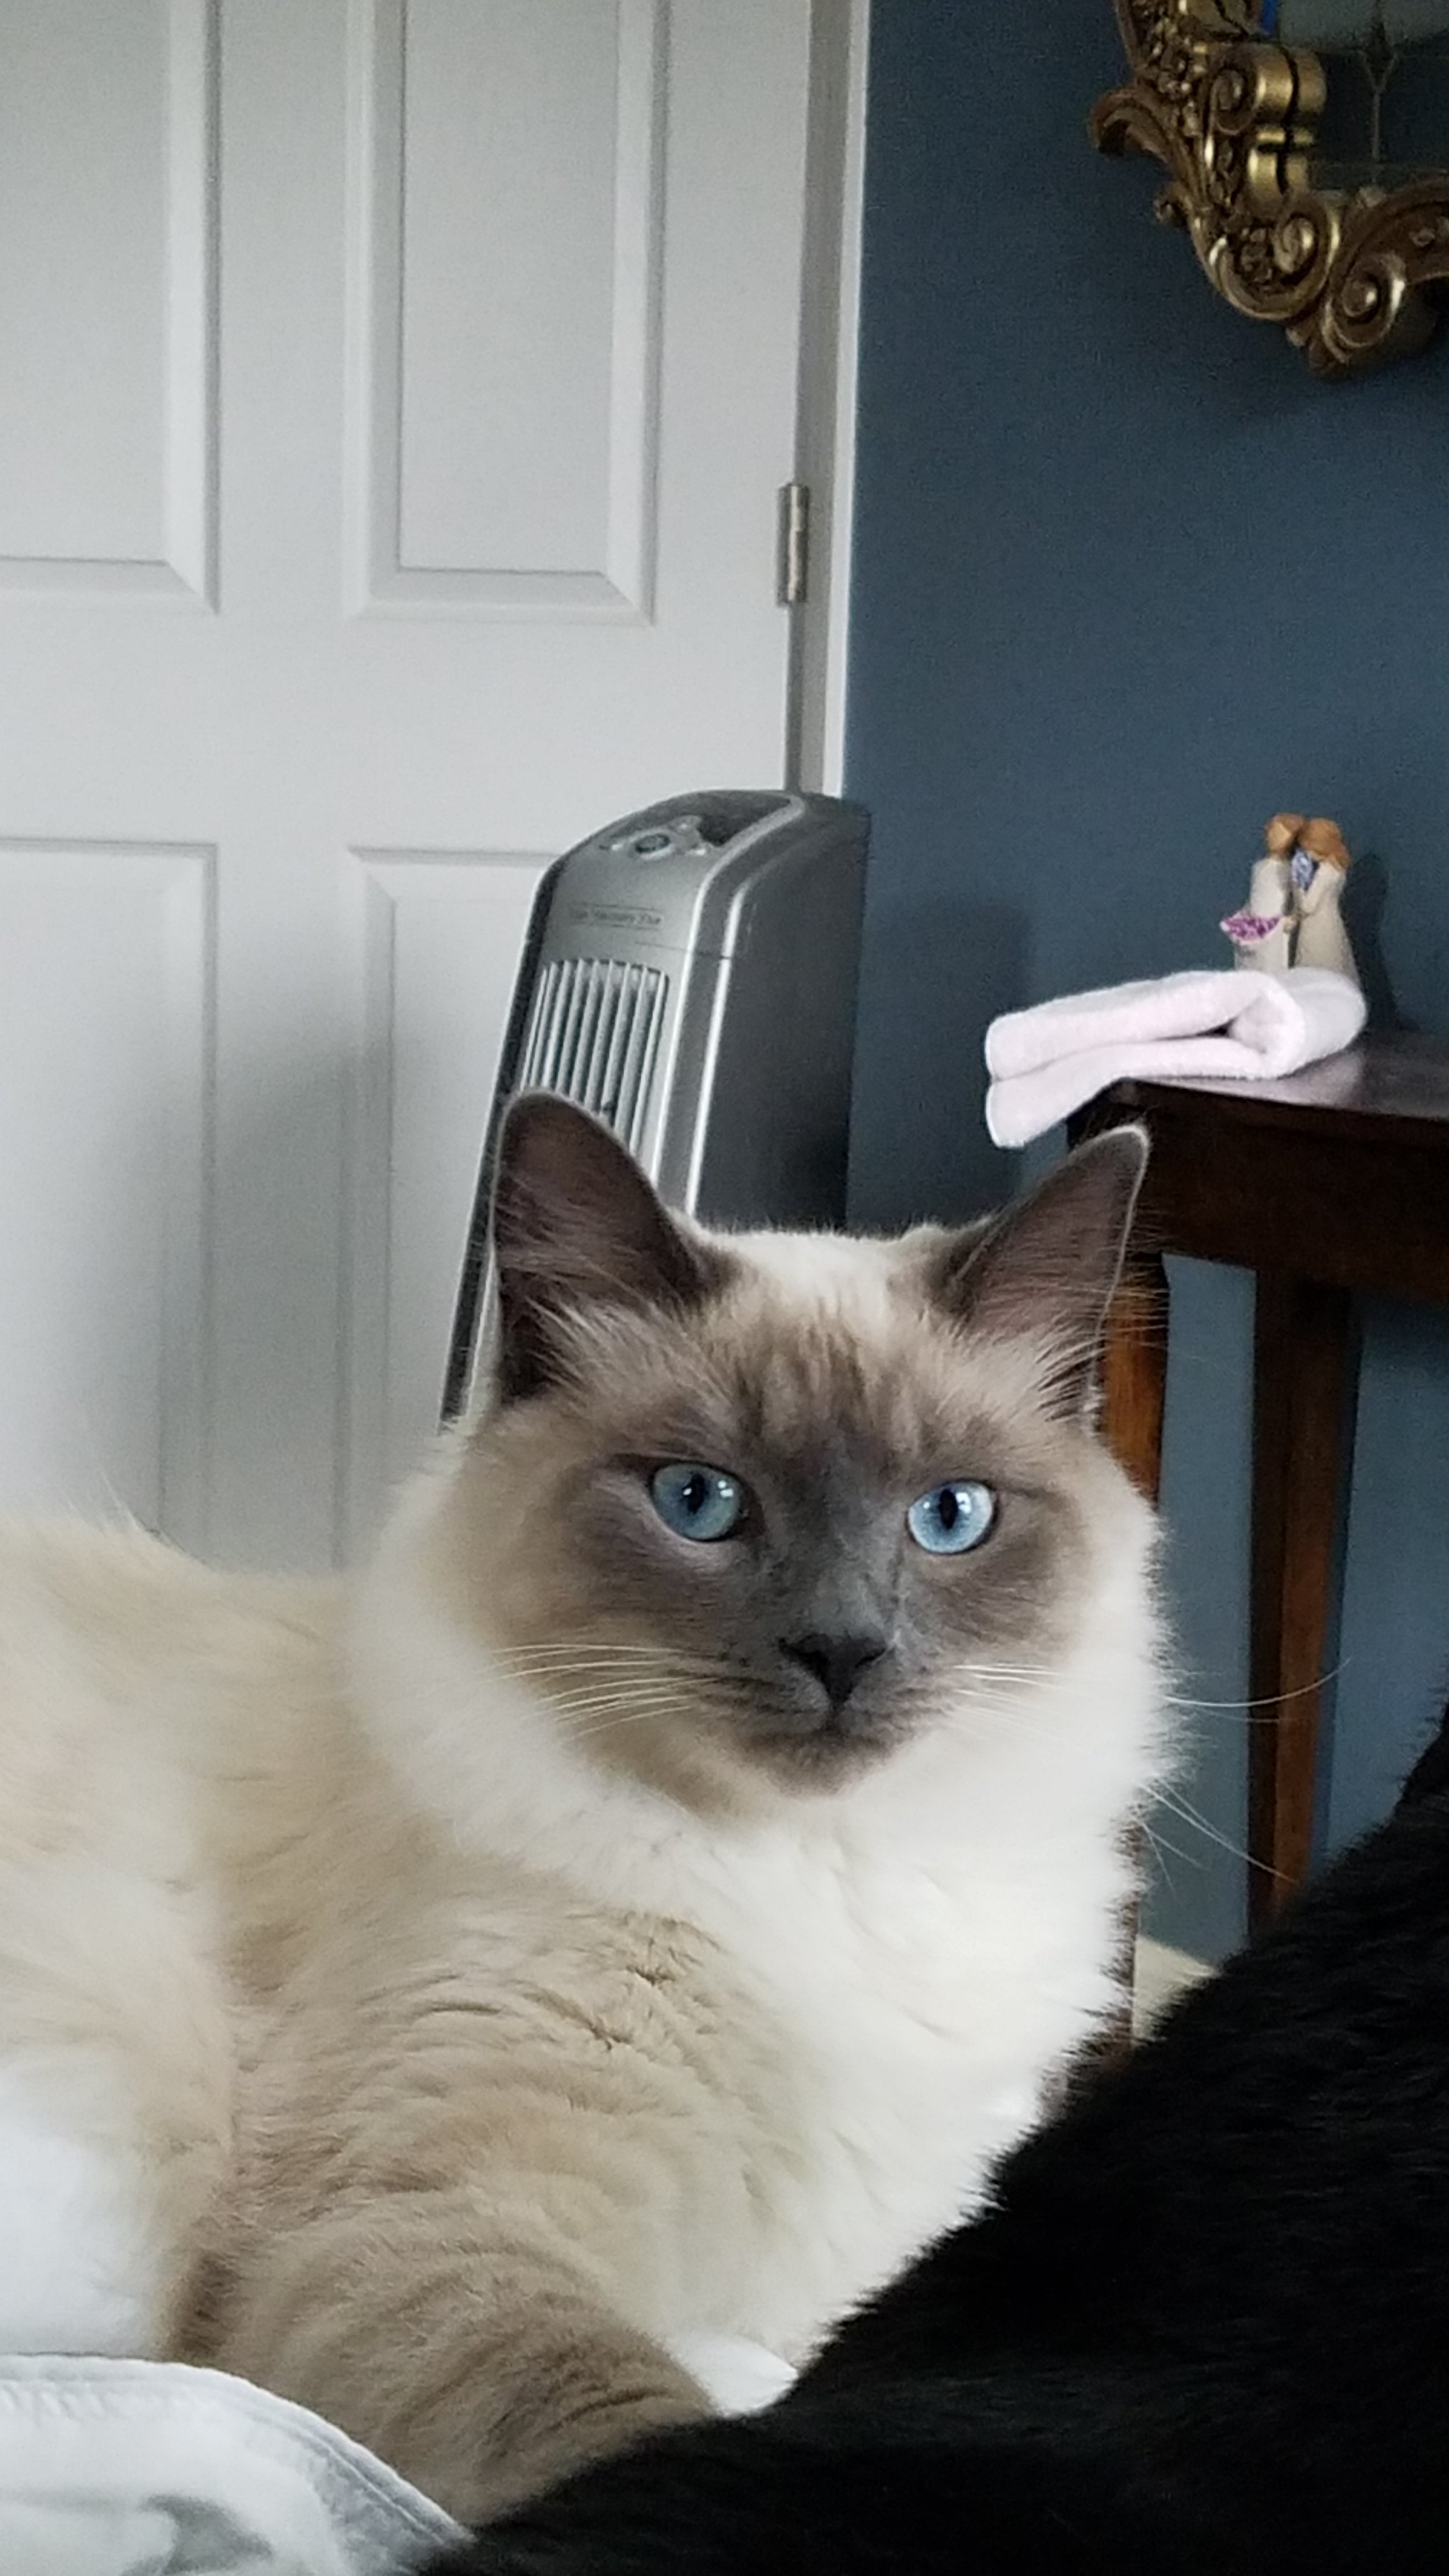 Is He A Long Haired Siamese Mix? | TheCatSite